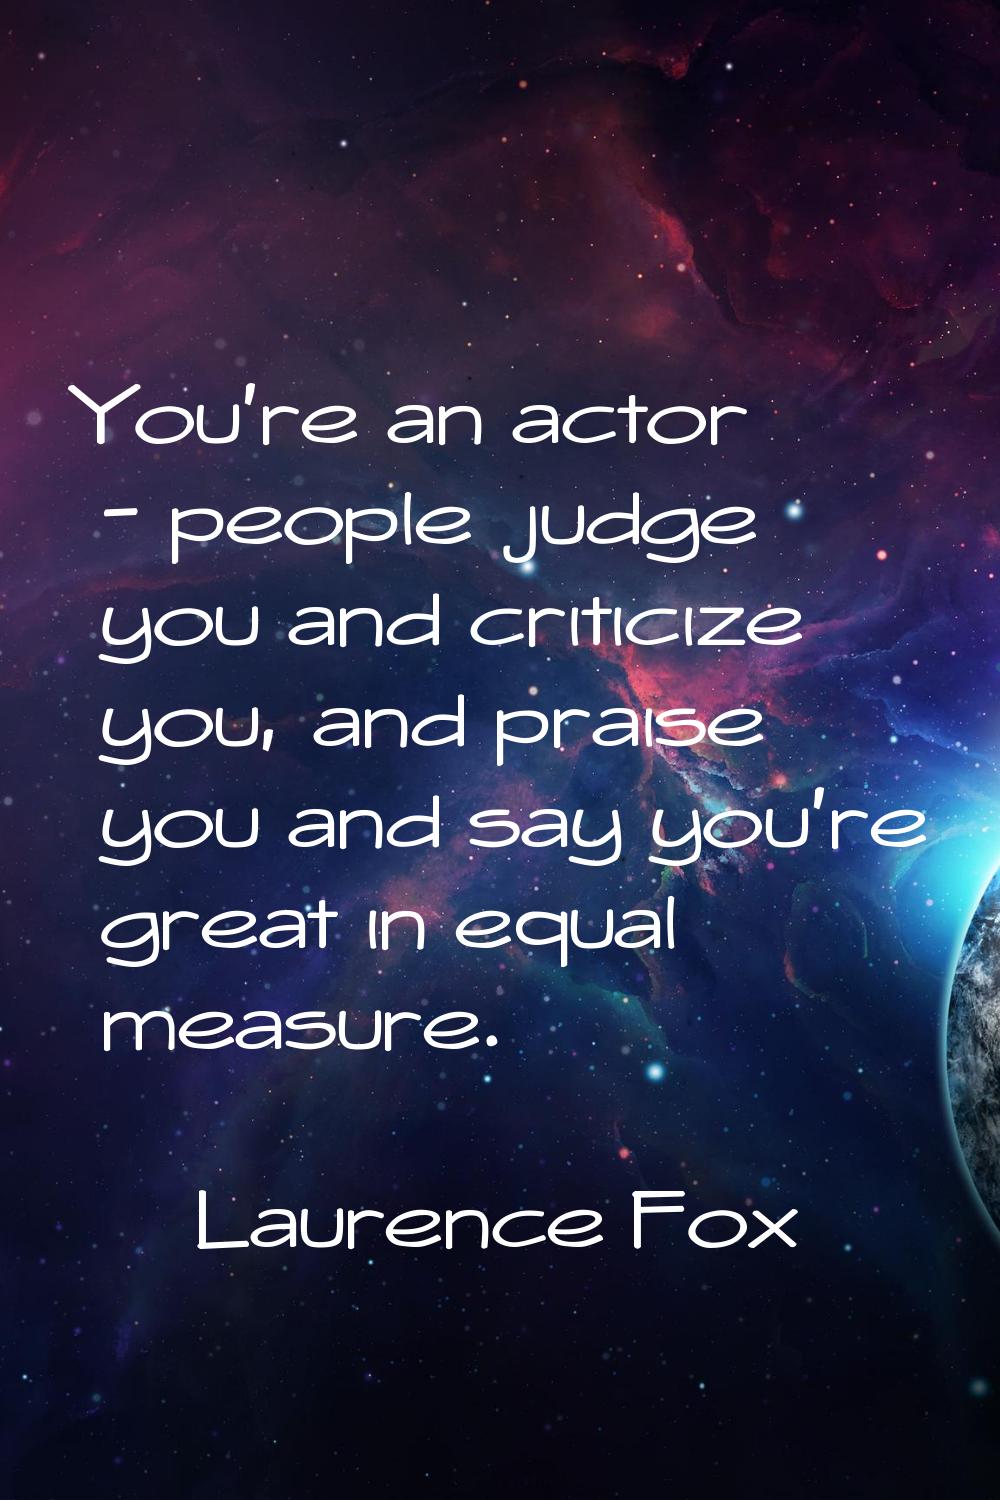 You're an actor - people judge you and criticize you, and praise you and say you're great in equal 